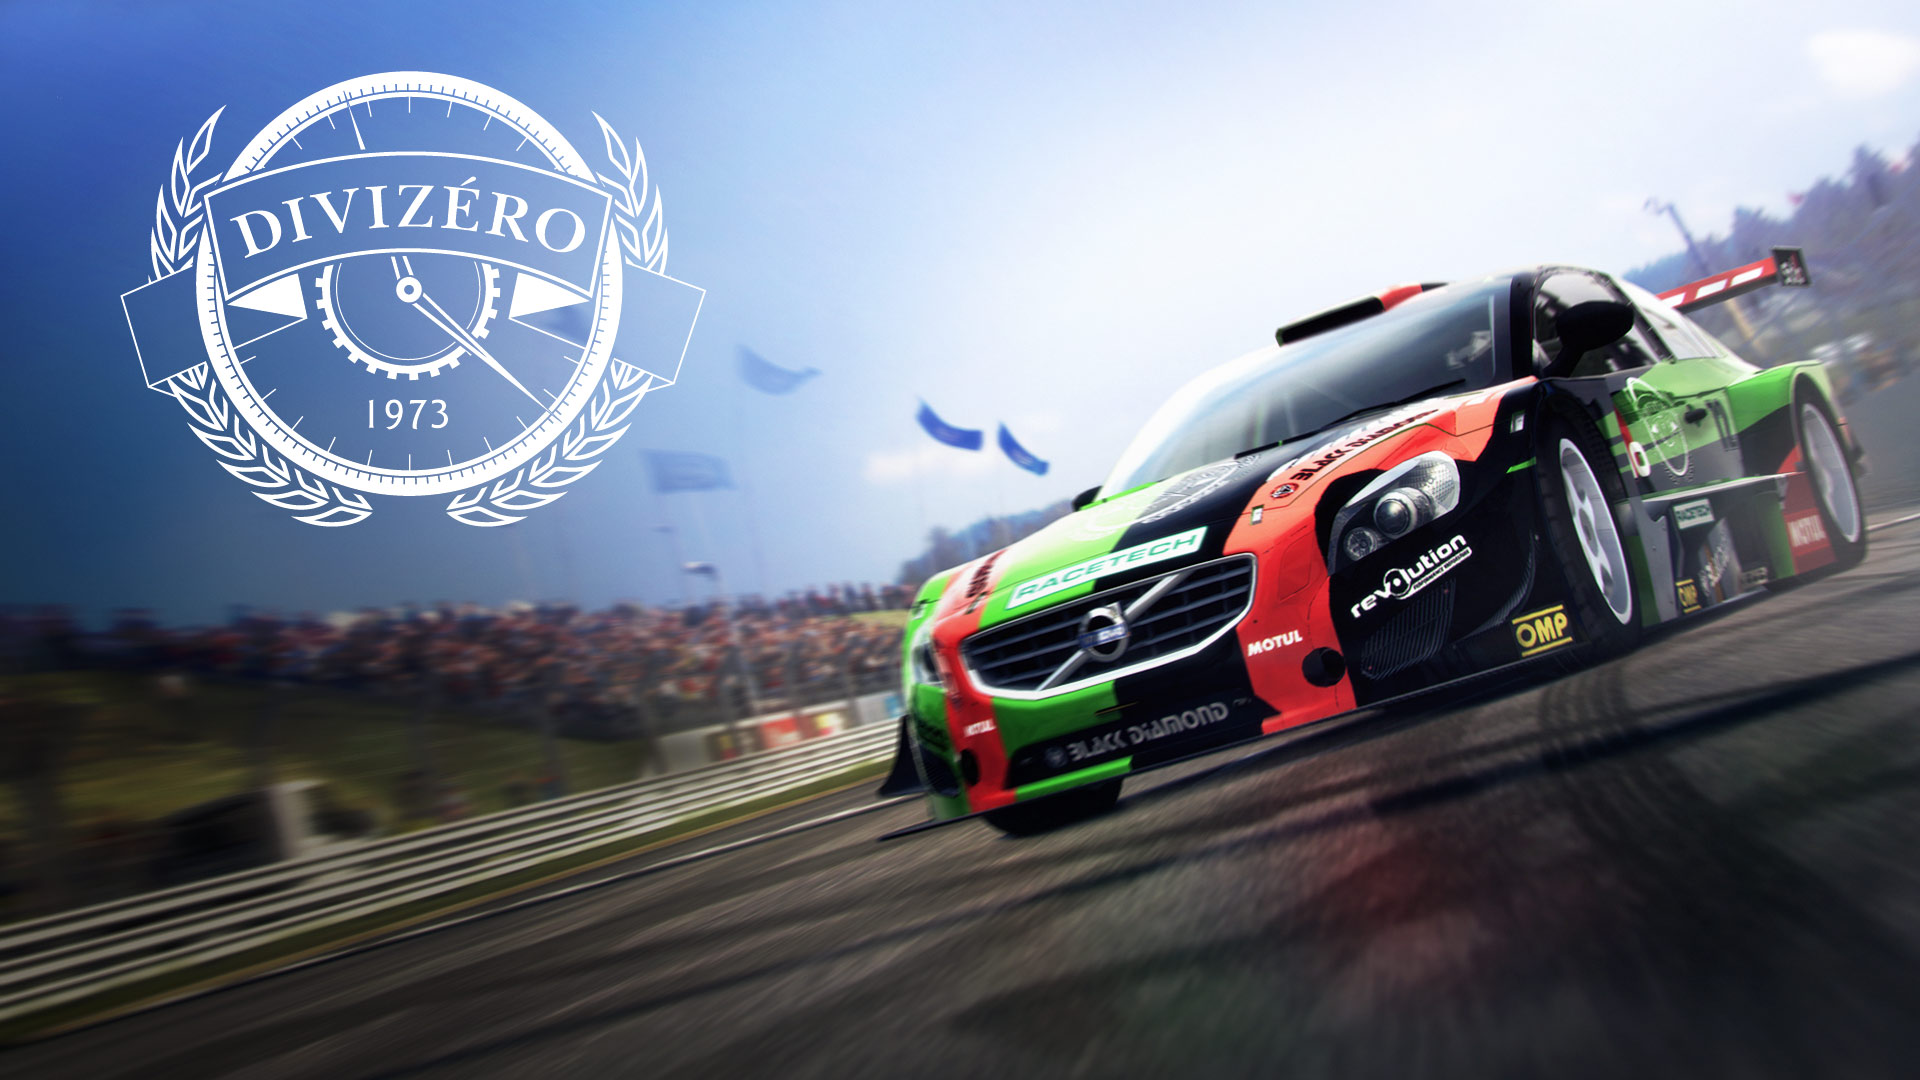 grid 2 hd wallpaper background image 1920x1080 on grid 2 wallpapers